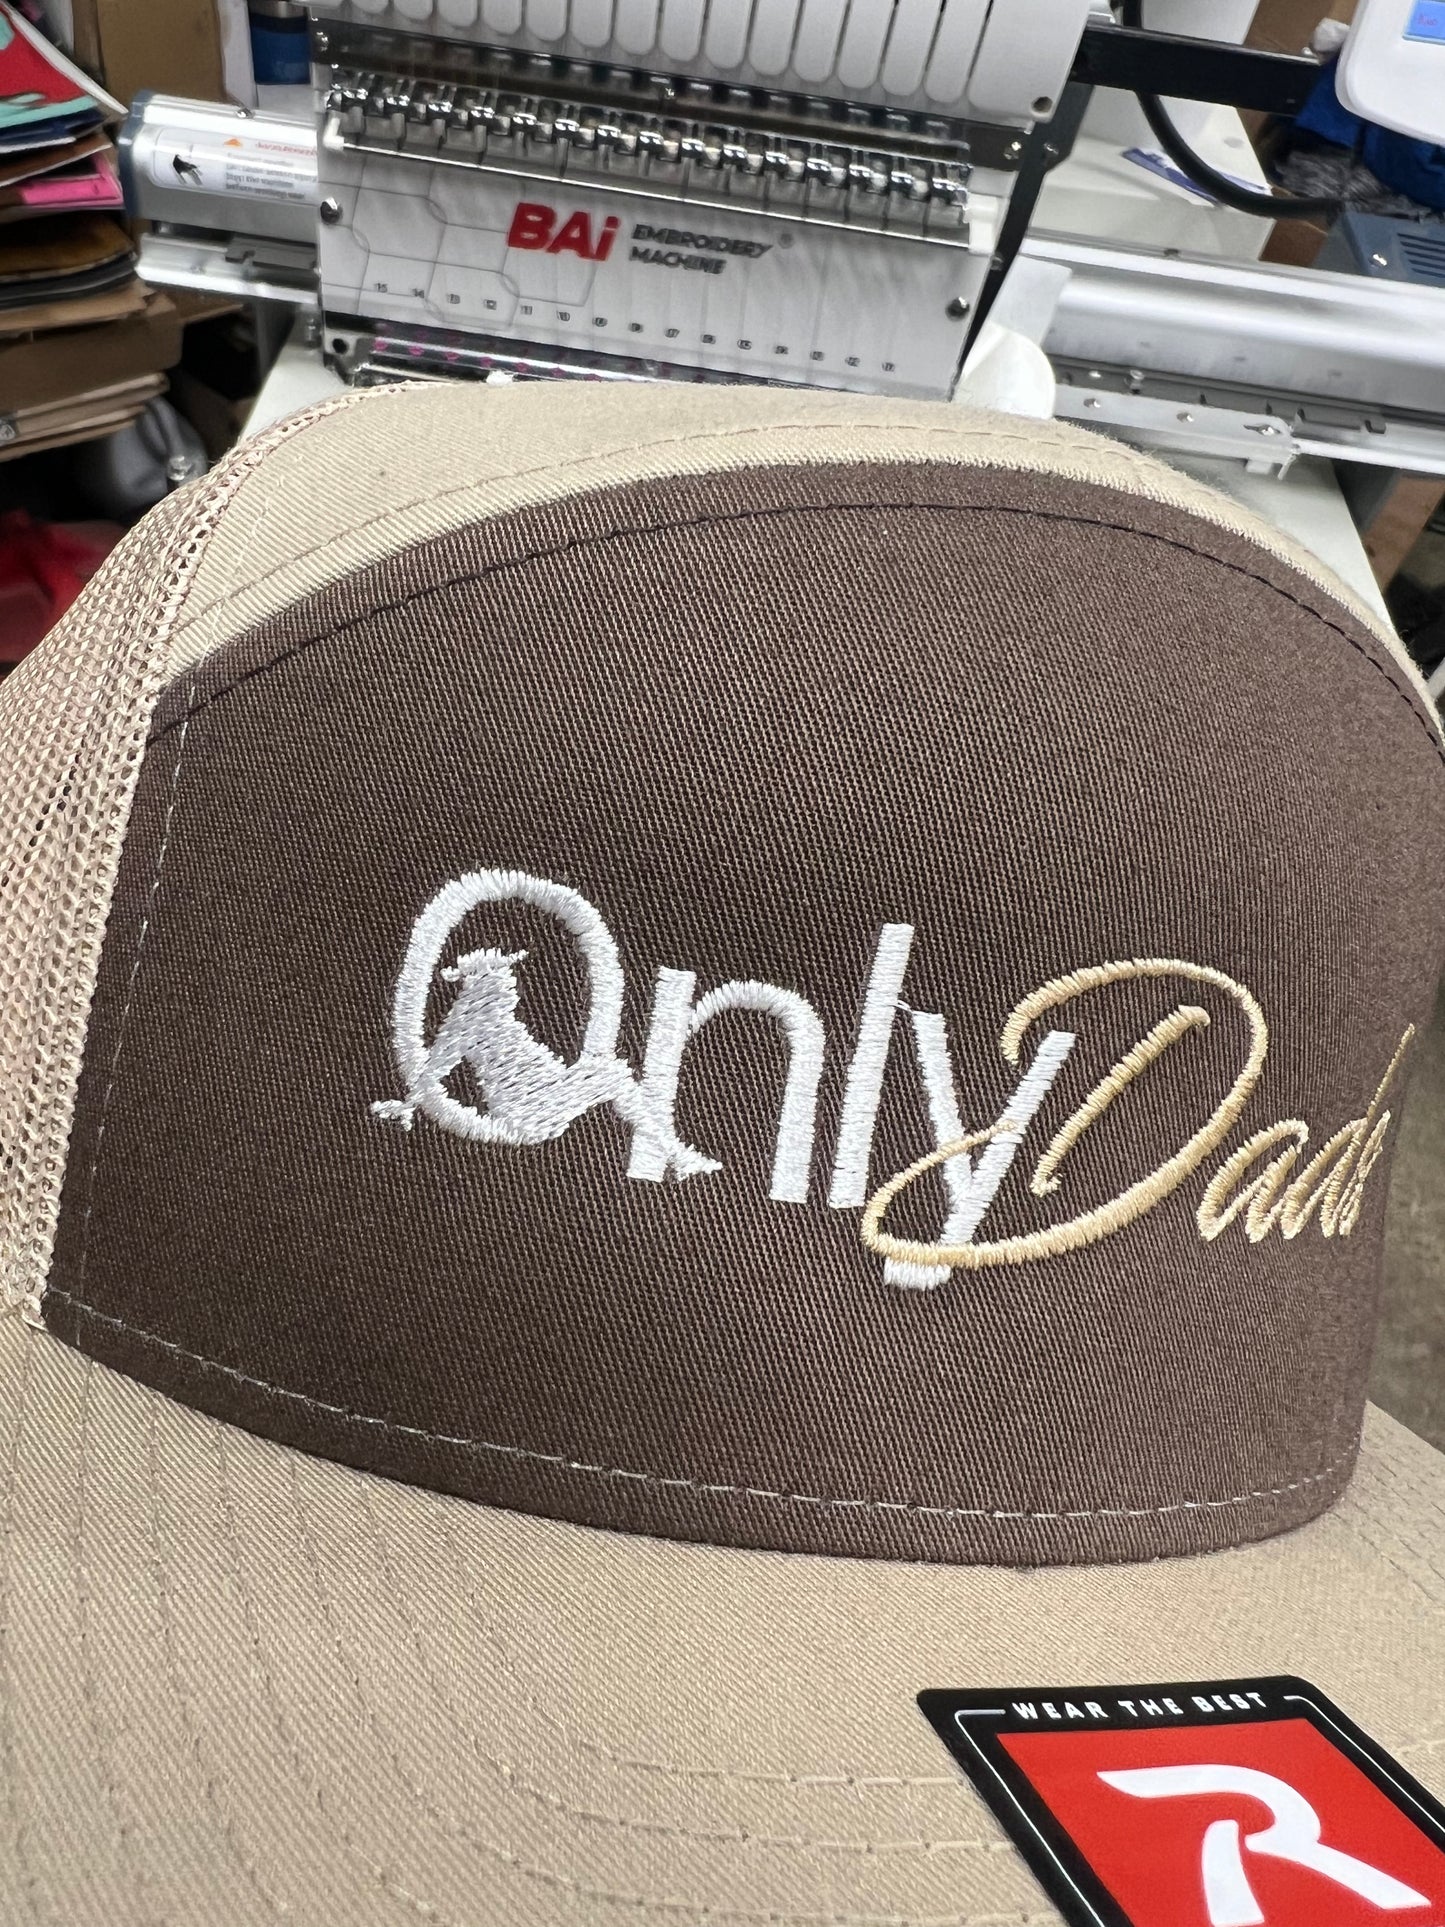 OnlyDads Cowboy Edition Embroidered Hat Brown/Tan